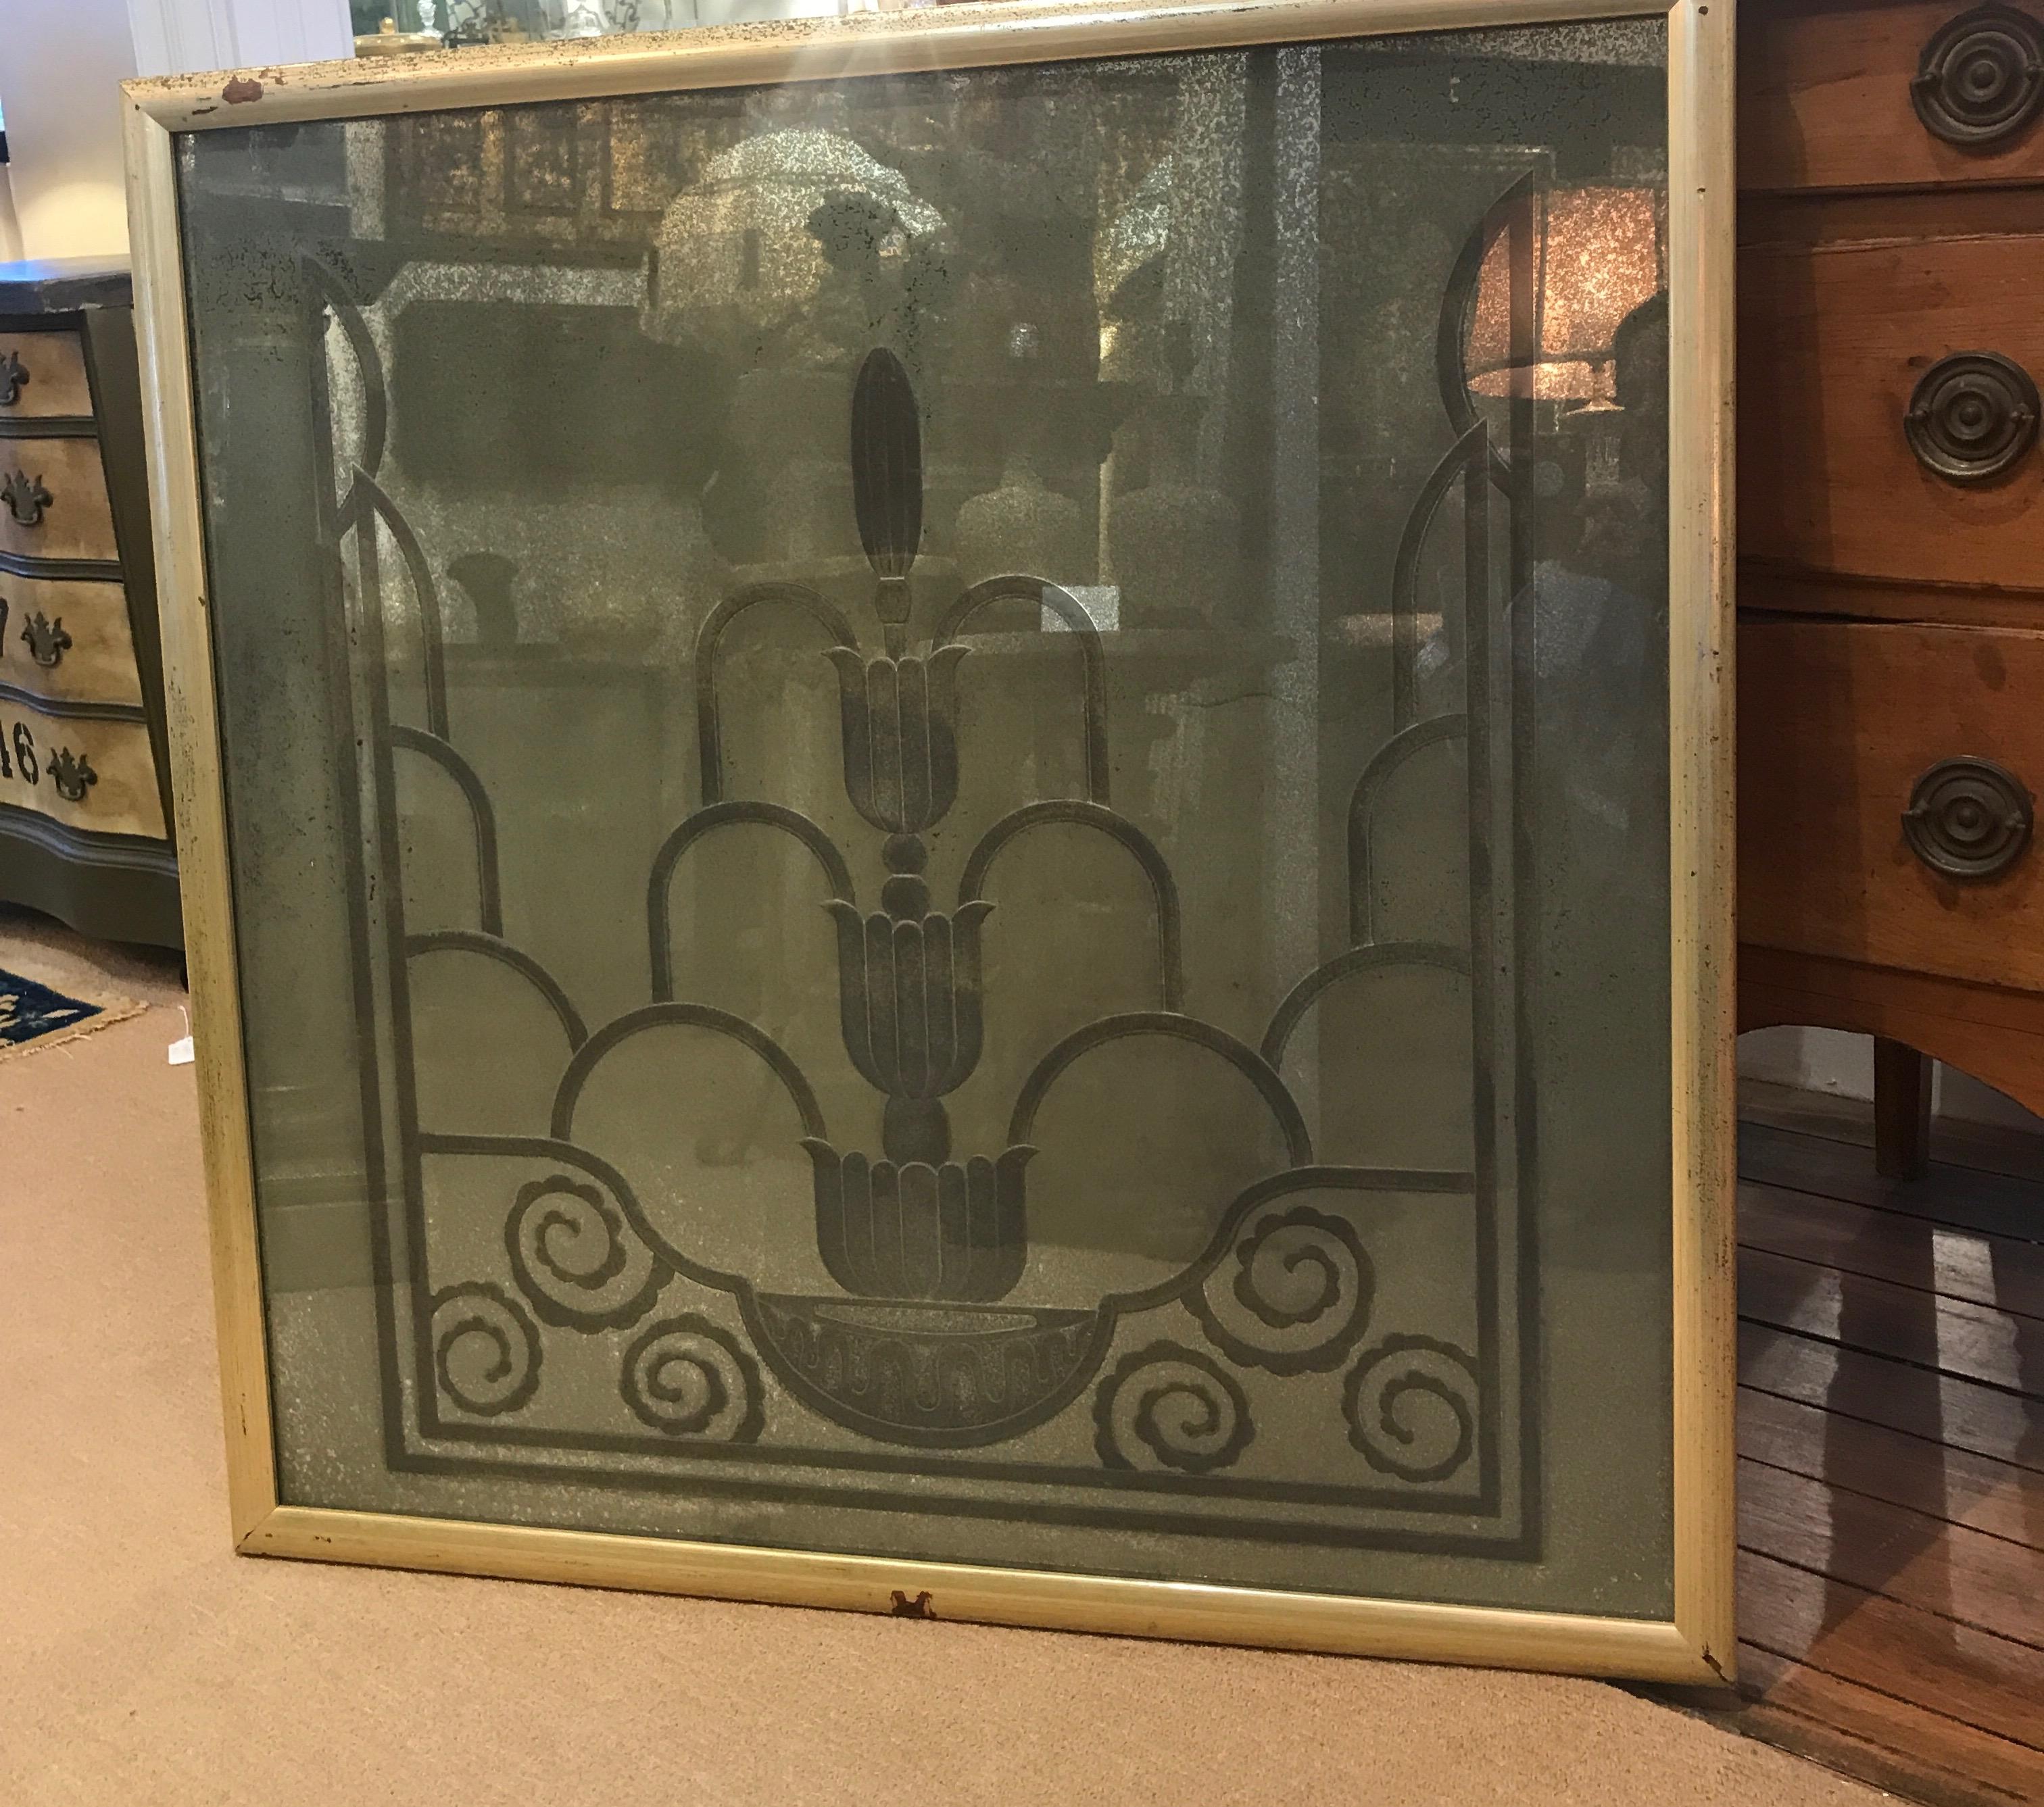 Fabulous engraved mirror from the Art Deco period from the Waldorf Astoria in NYC. Classic late 1920s deco design of a stylized fountain engraved on the back of the silvered glass in a later silver gilt frame. The silvering is fogged and aged, the